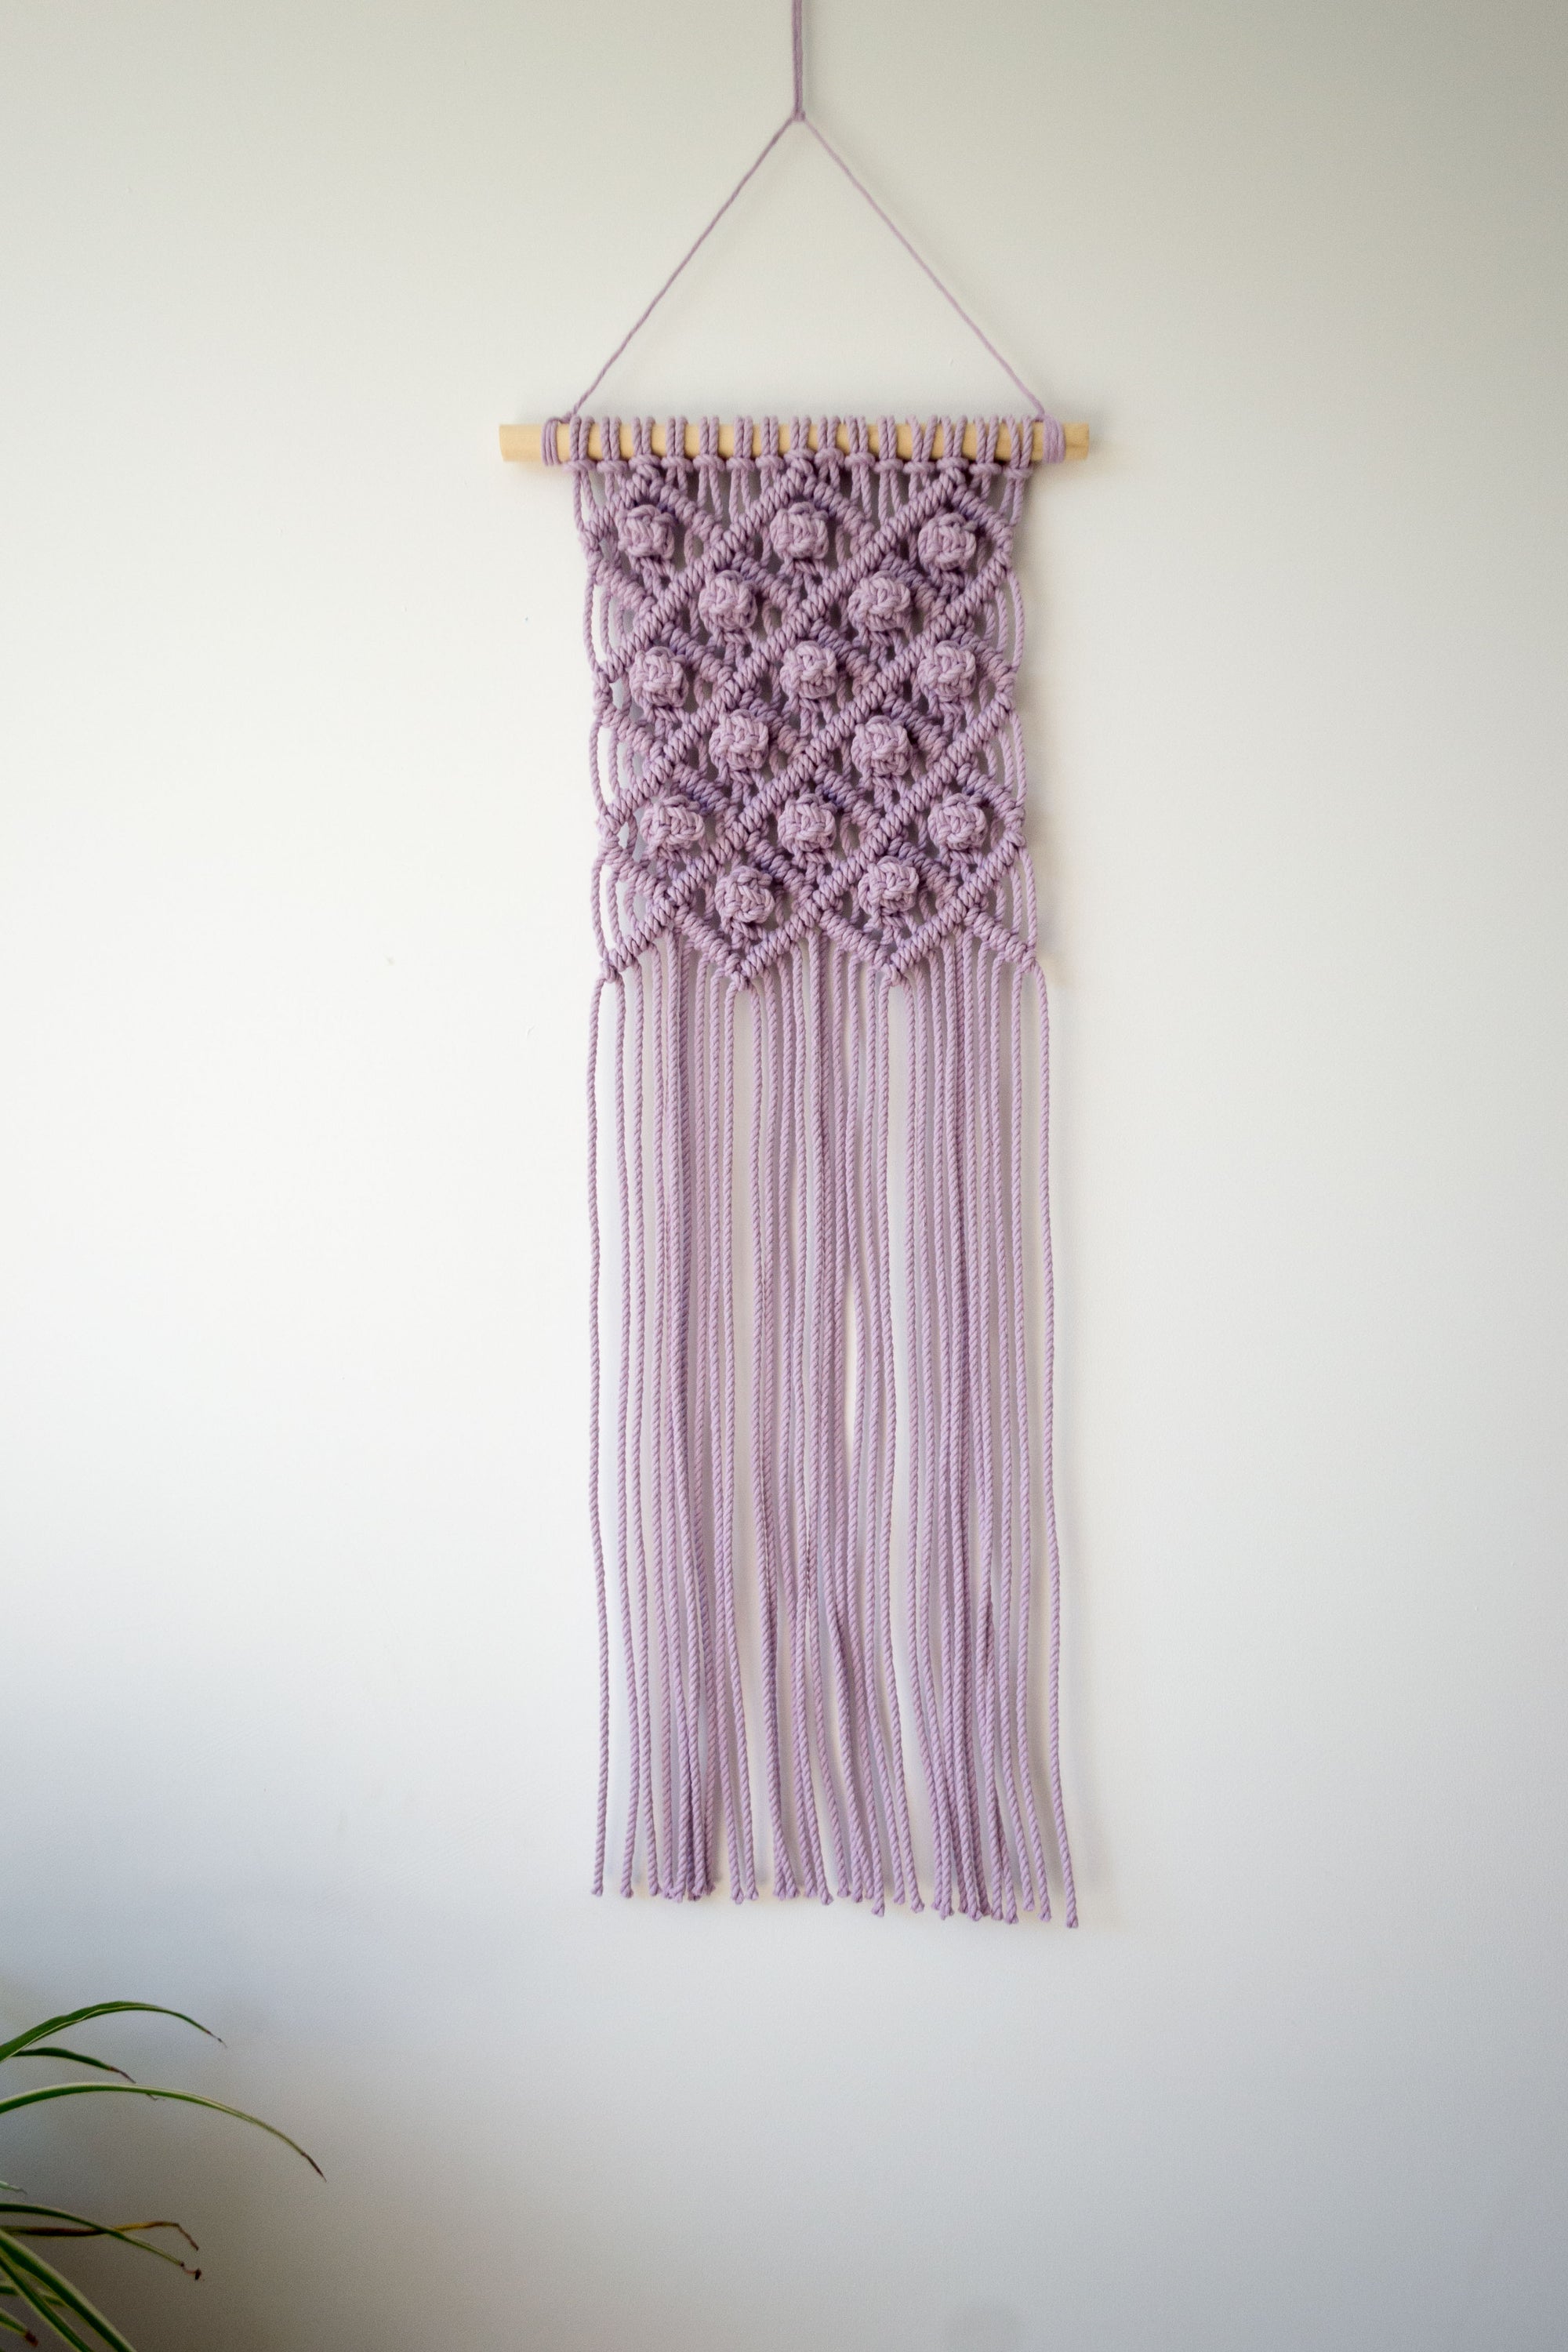 Macrame Wall Hanging 'Berry' - DIY KIT - Available in multiple color variations